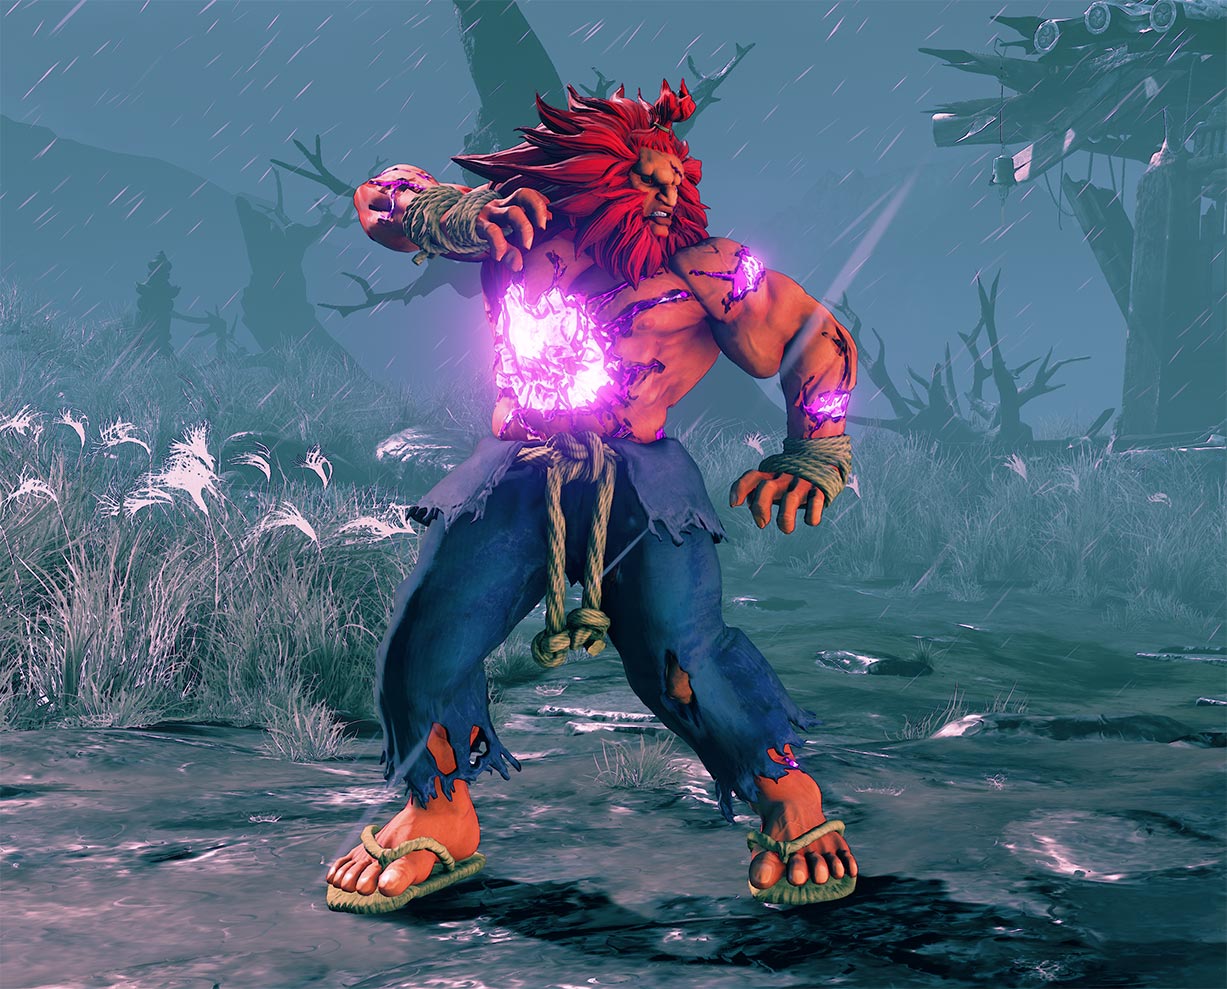 Capcom Debuts Season 2 Of STREET FIGHTER V With Akuma And 92 Pages